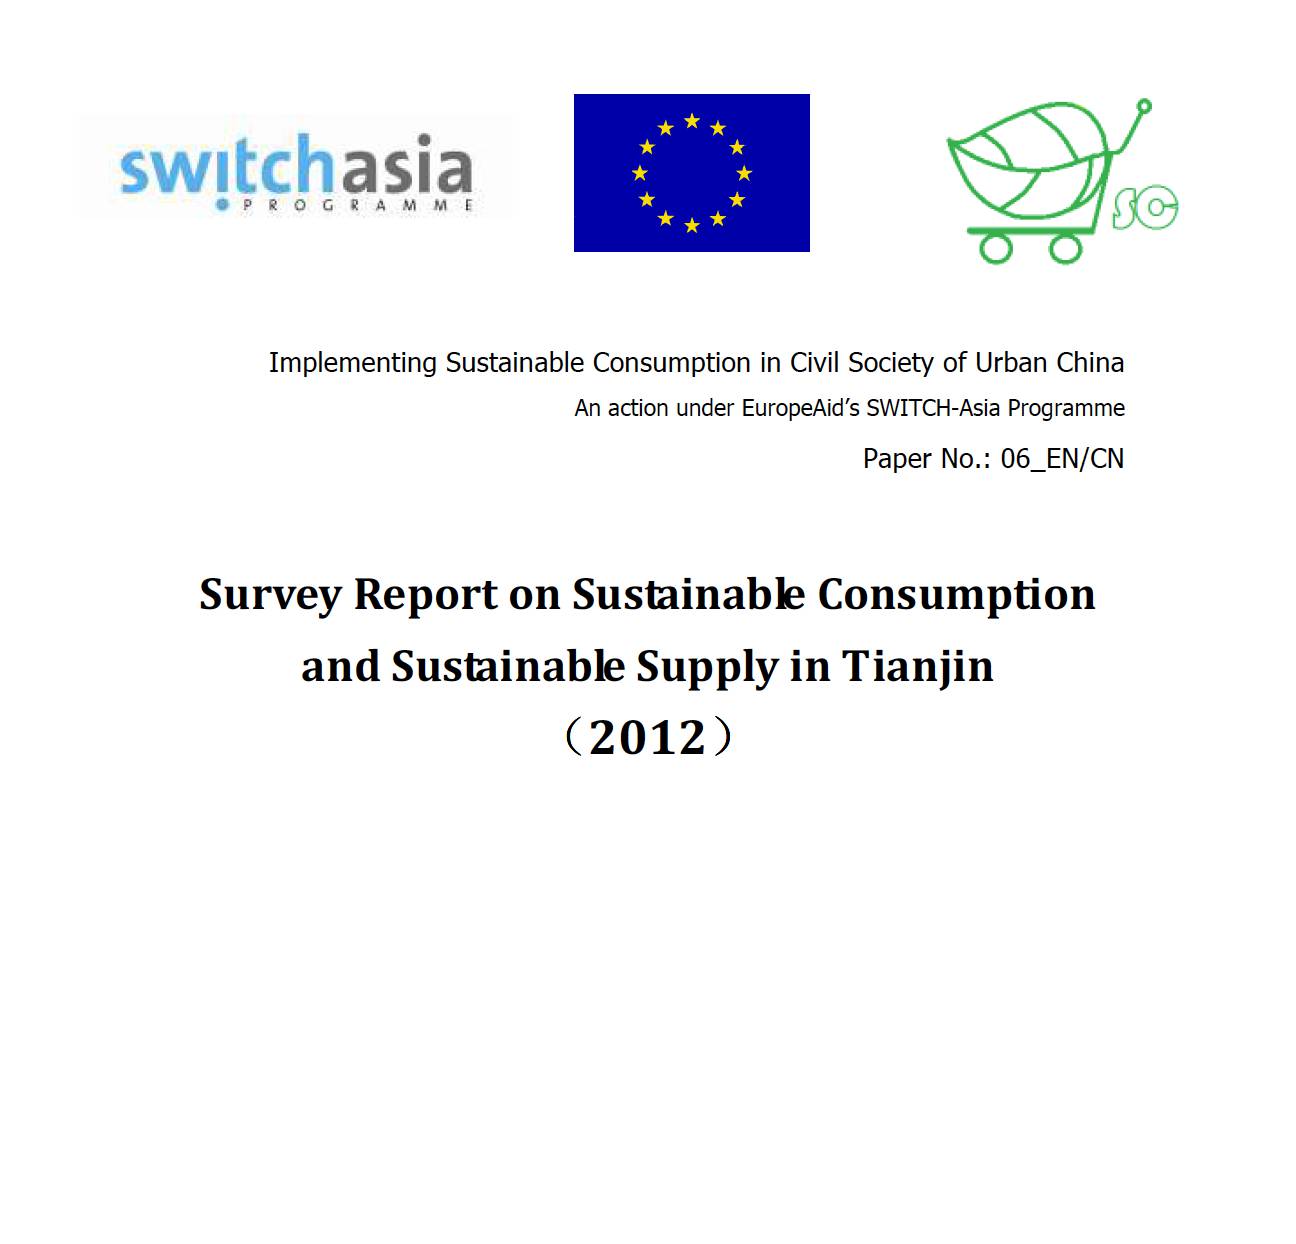 Survey Report on Sustainable Consumption and Sustainable Supply in Tianjin